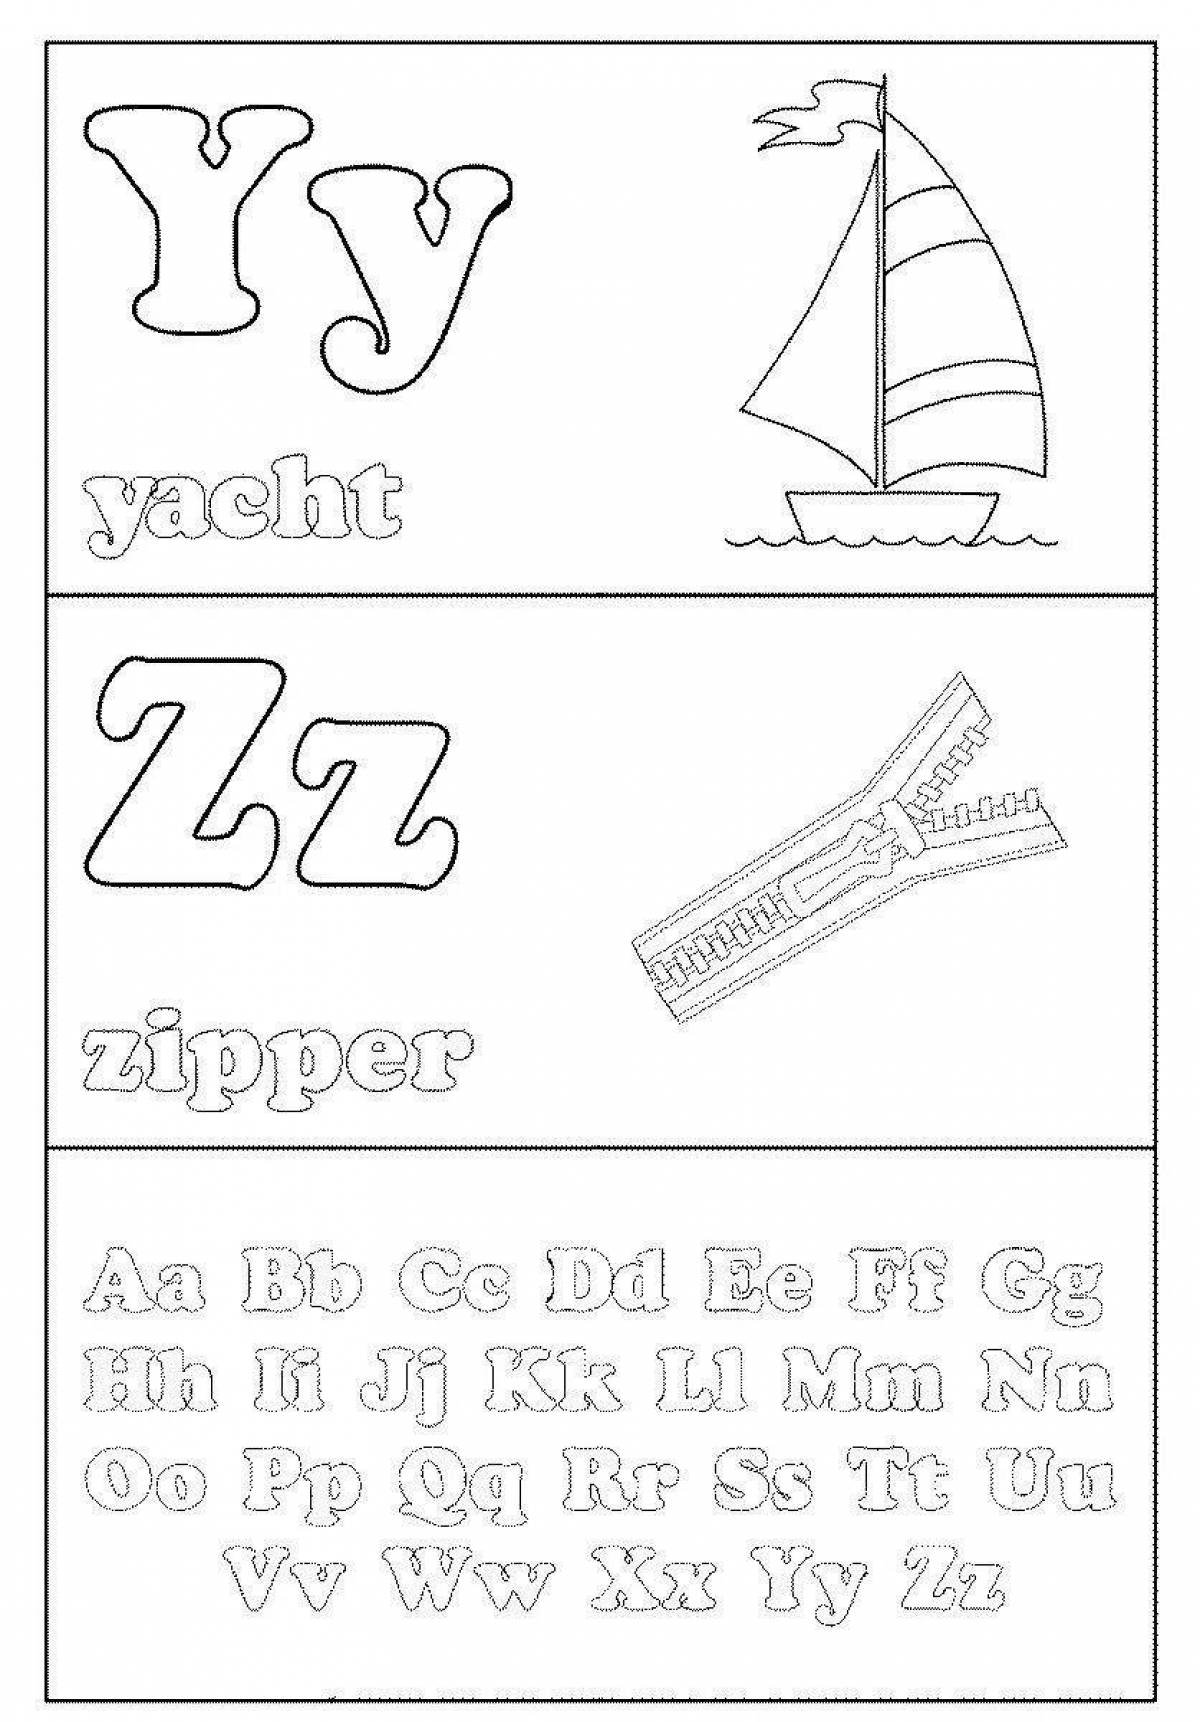 Glorious alphabet coloring page